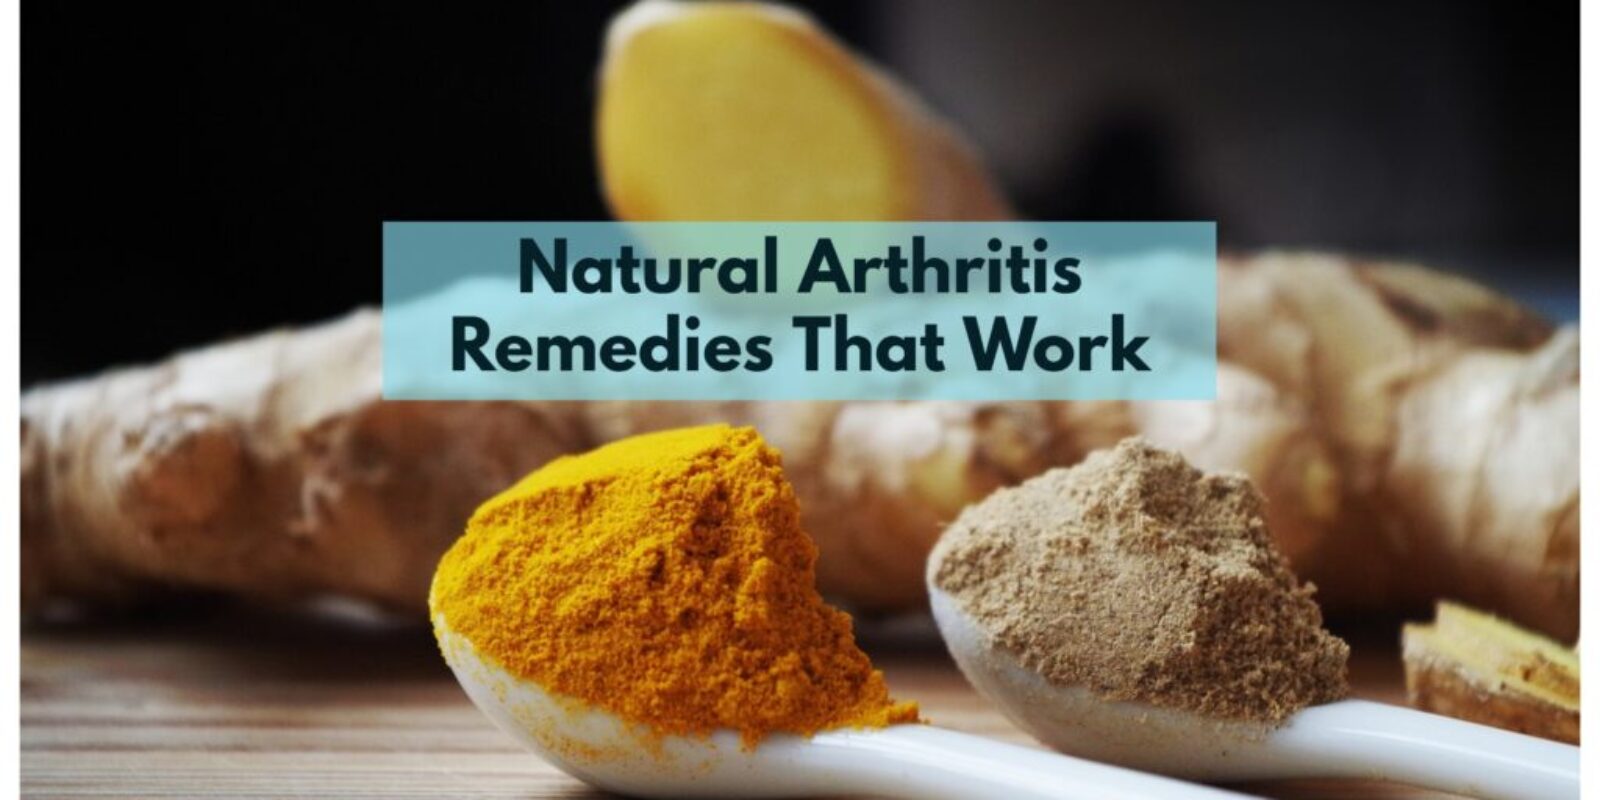 The utilization of natural arthritis remedies to manage the symptoms has long been established and practiced.